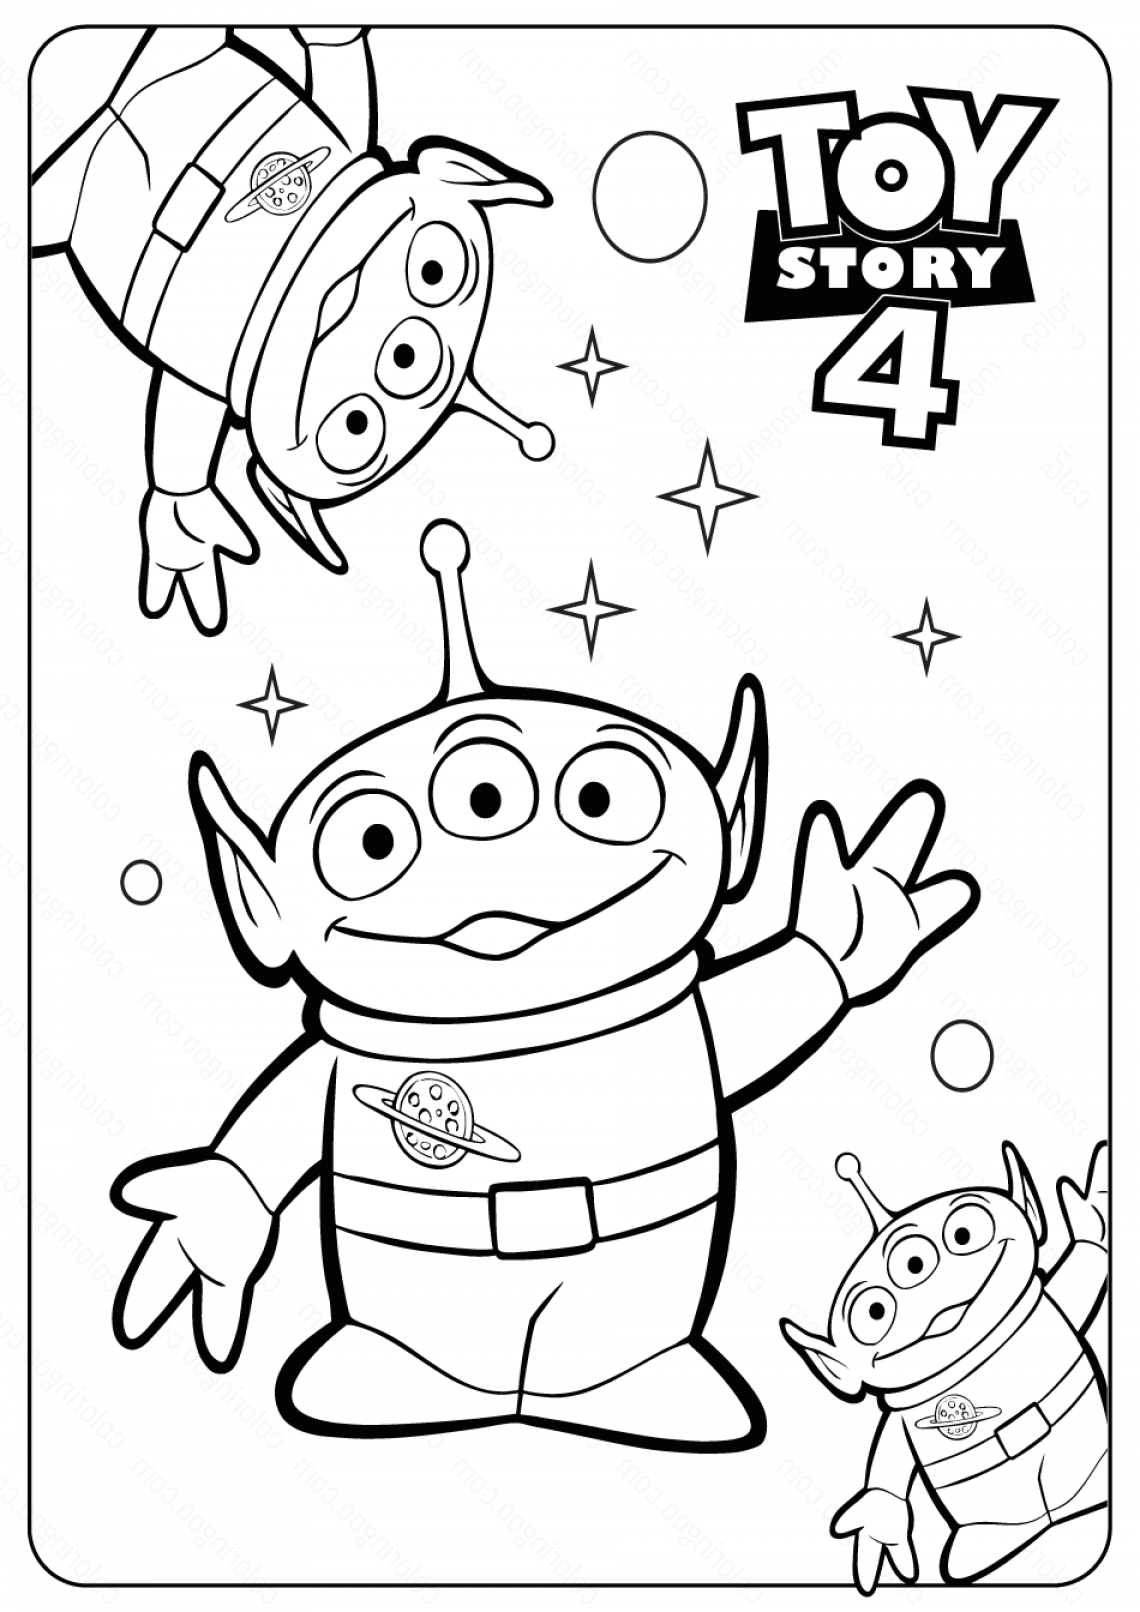 Toy Story 4 Aliens Coloring Pages for kids - SheetalColor.com